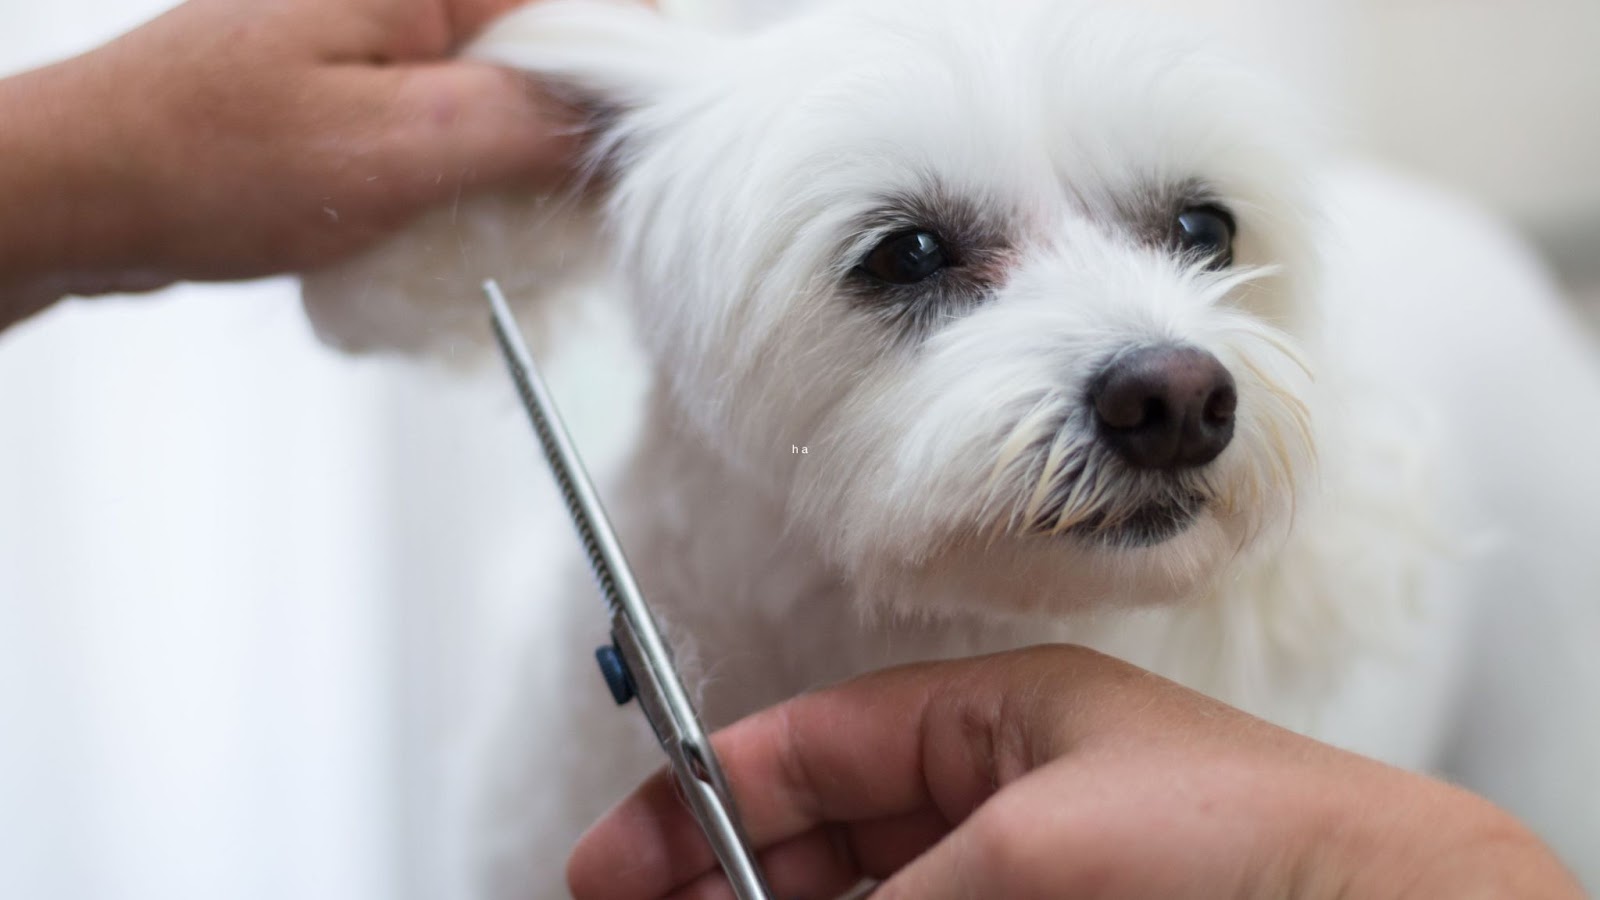 Maltese dog getting trimmed at grooming parlor will affect grooming time